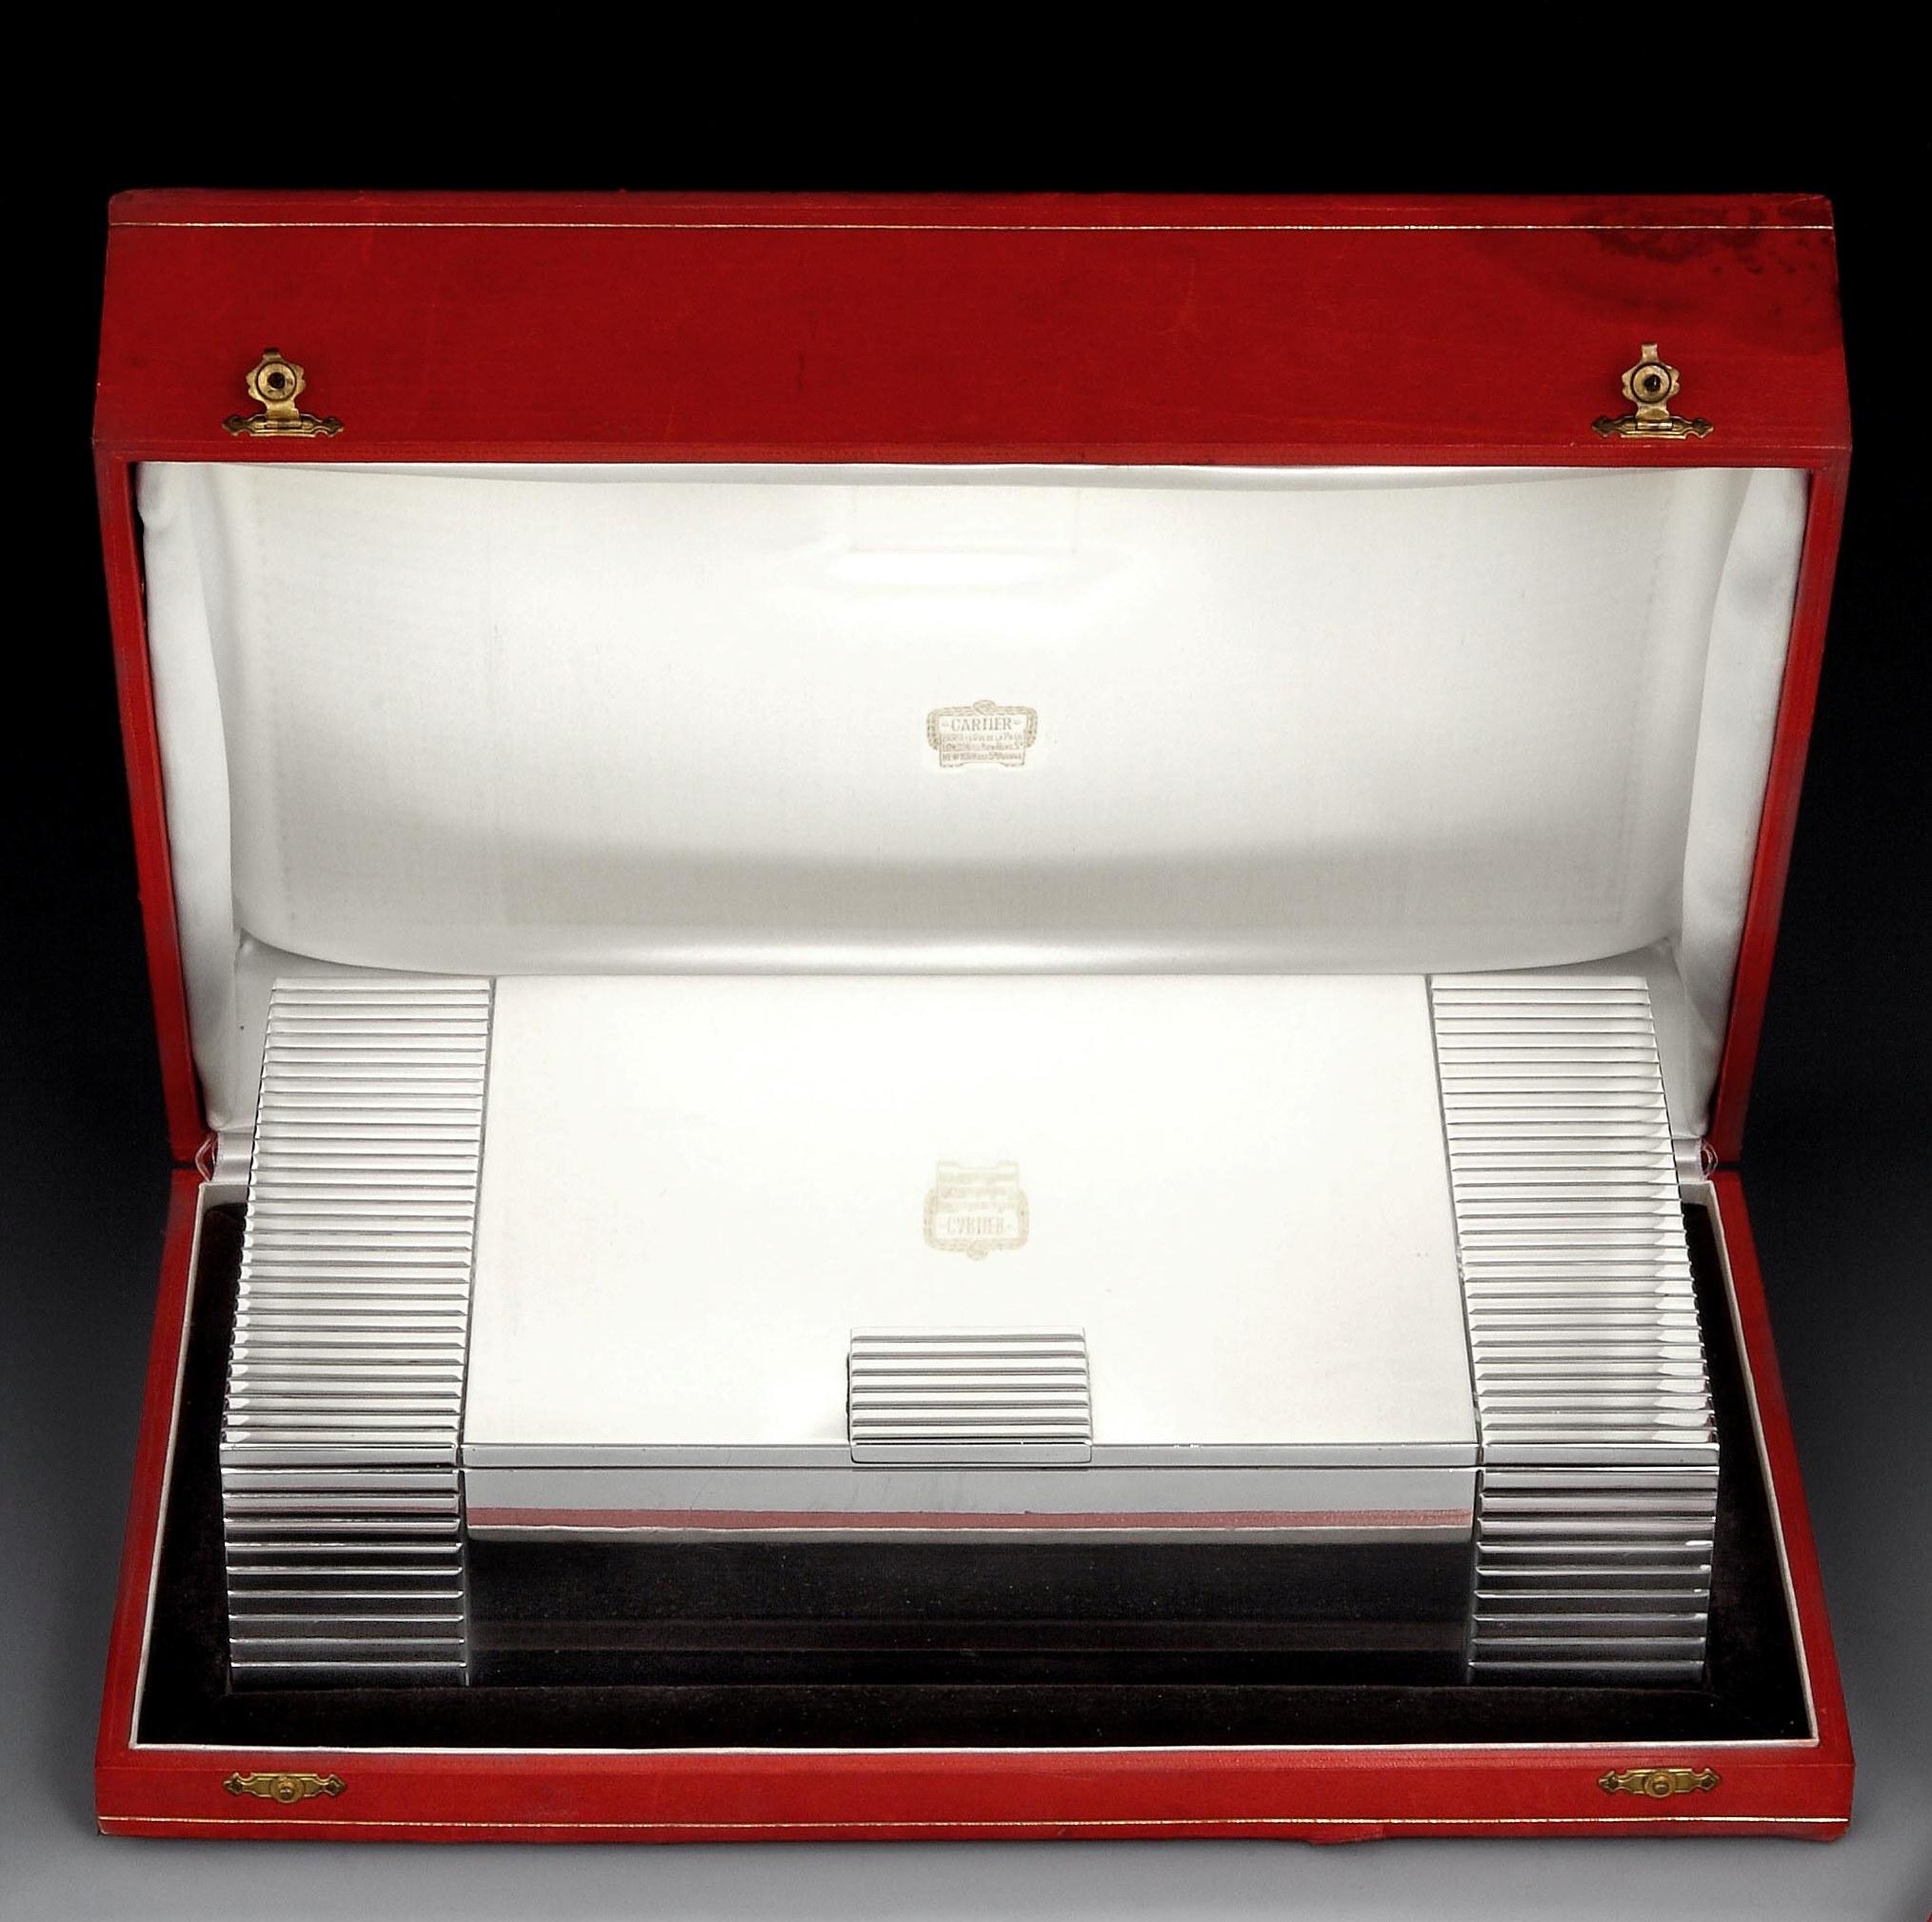 Cartier, Paris

A magnificent and generous sterling silver Art Deco cigar box of rectangular form, with a thick reeded border left and right, and a similarly designed thumbpiece. The interior of the box is cedar lined with a single, central